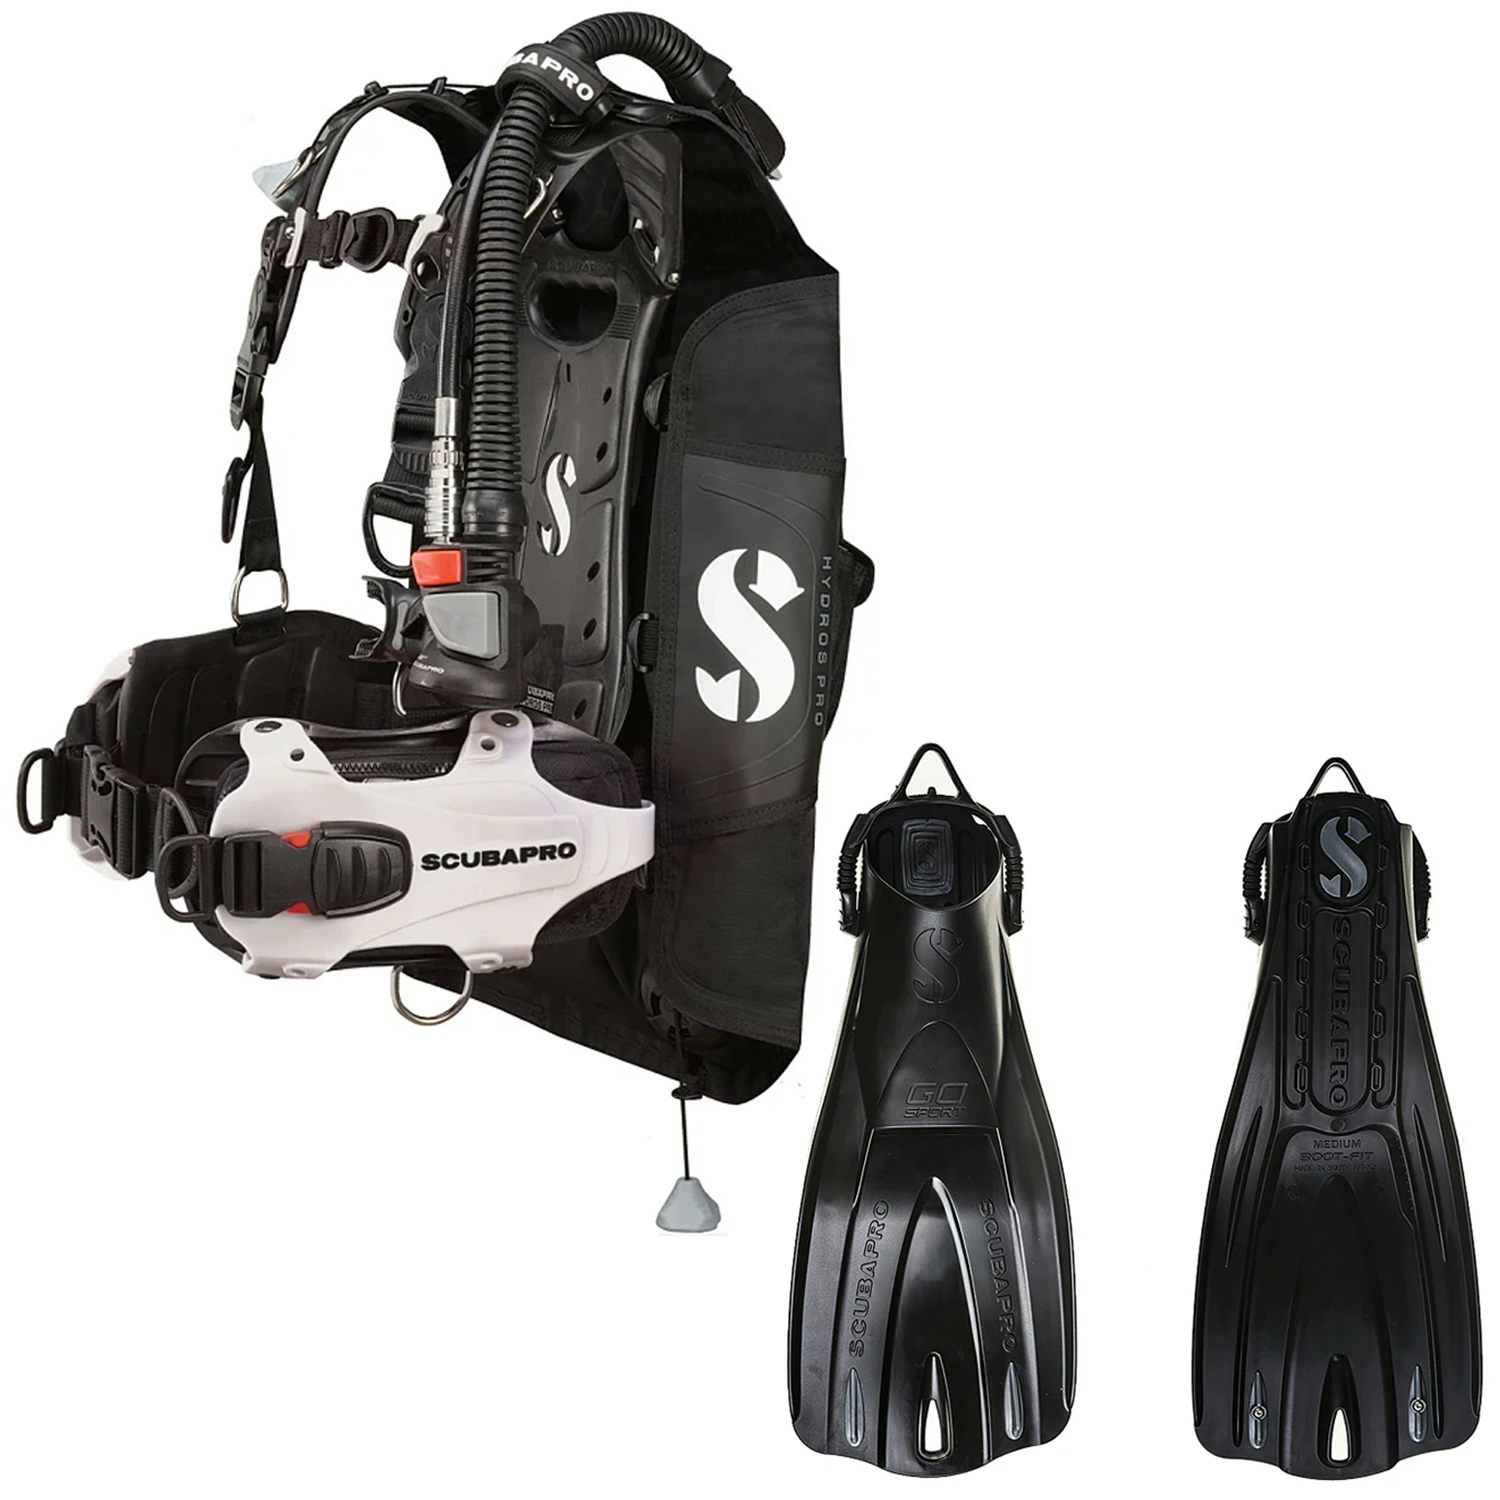 ScubaPro Hydros Pro BCD with Air2 (Women's) with Free Go Sport Open Heel Dive Fins